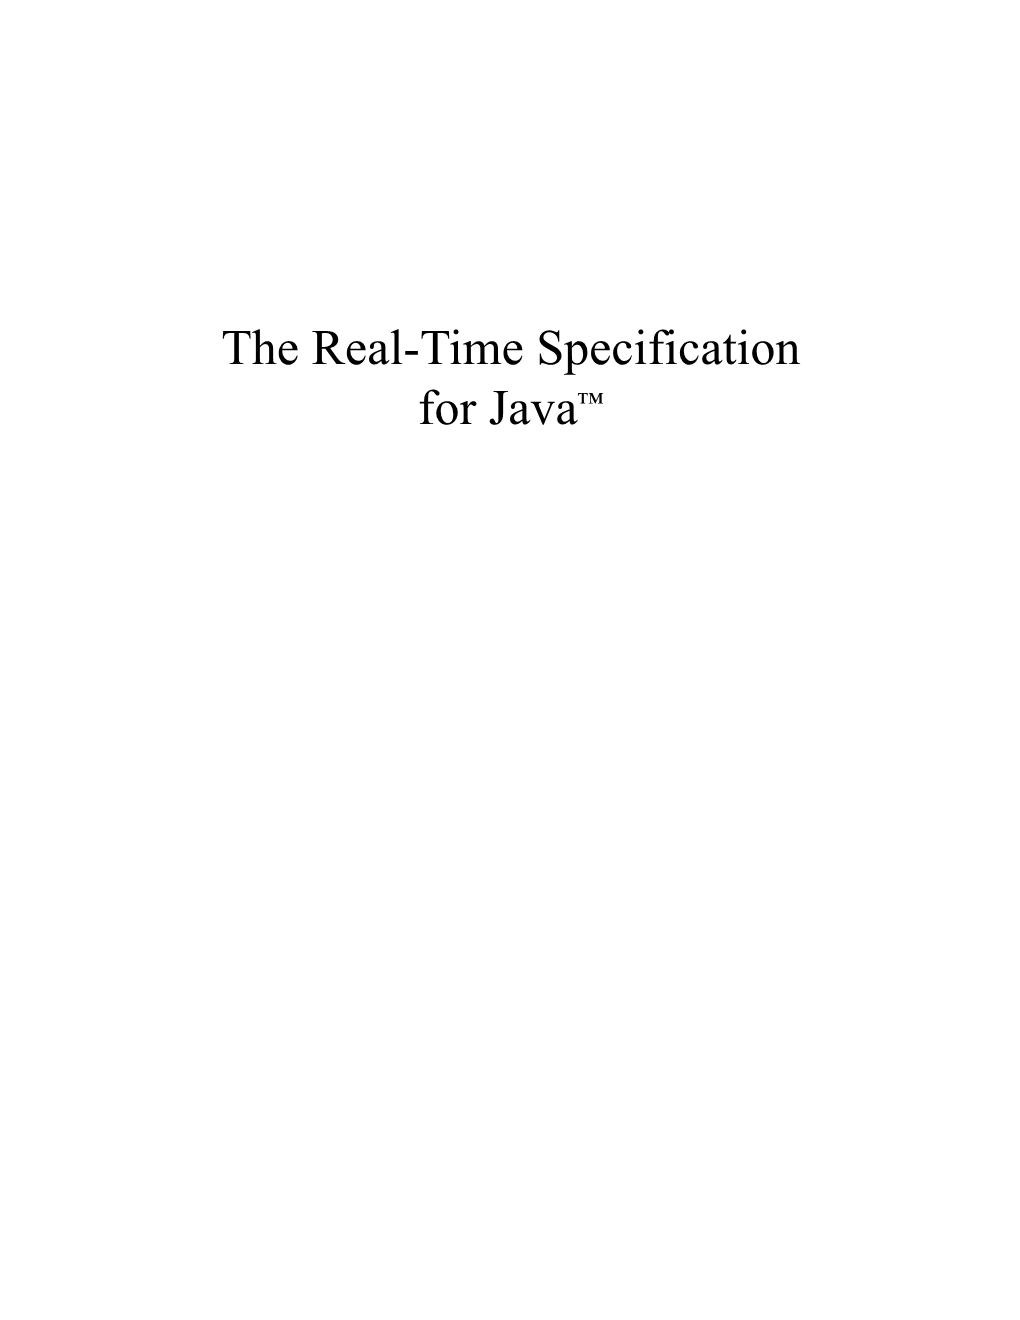 The Real-Time Specification for Java™ the Real-Time Specification for Java™